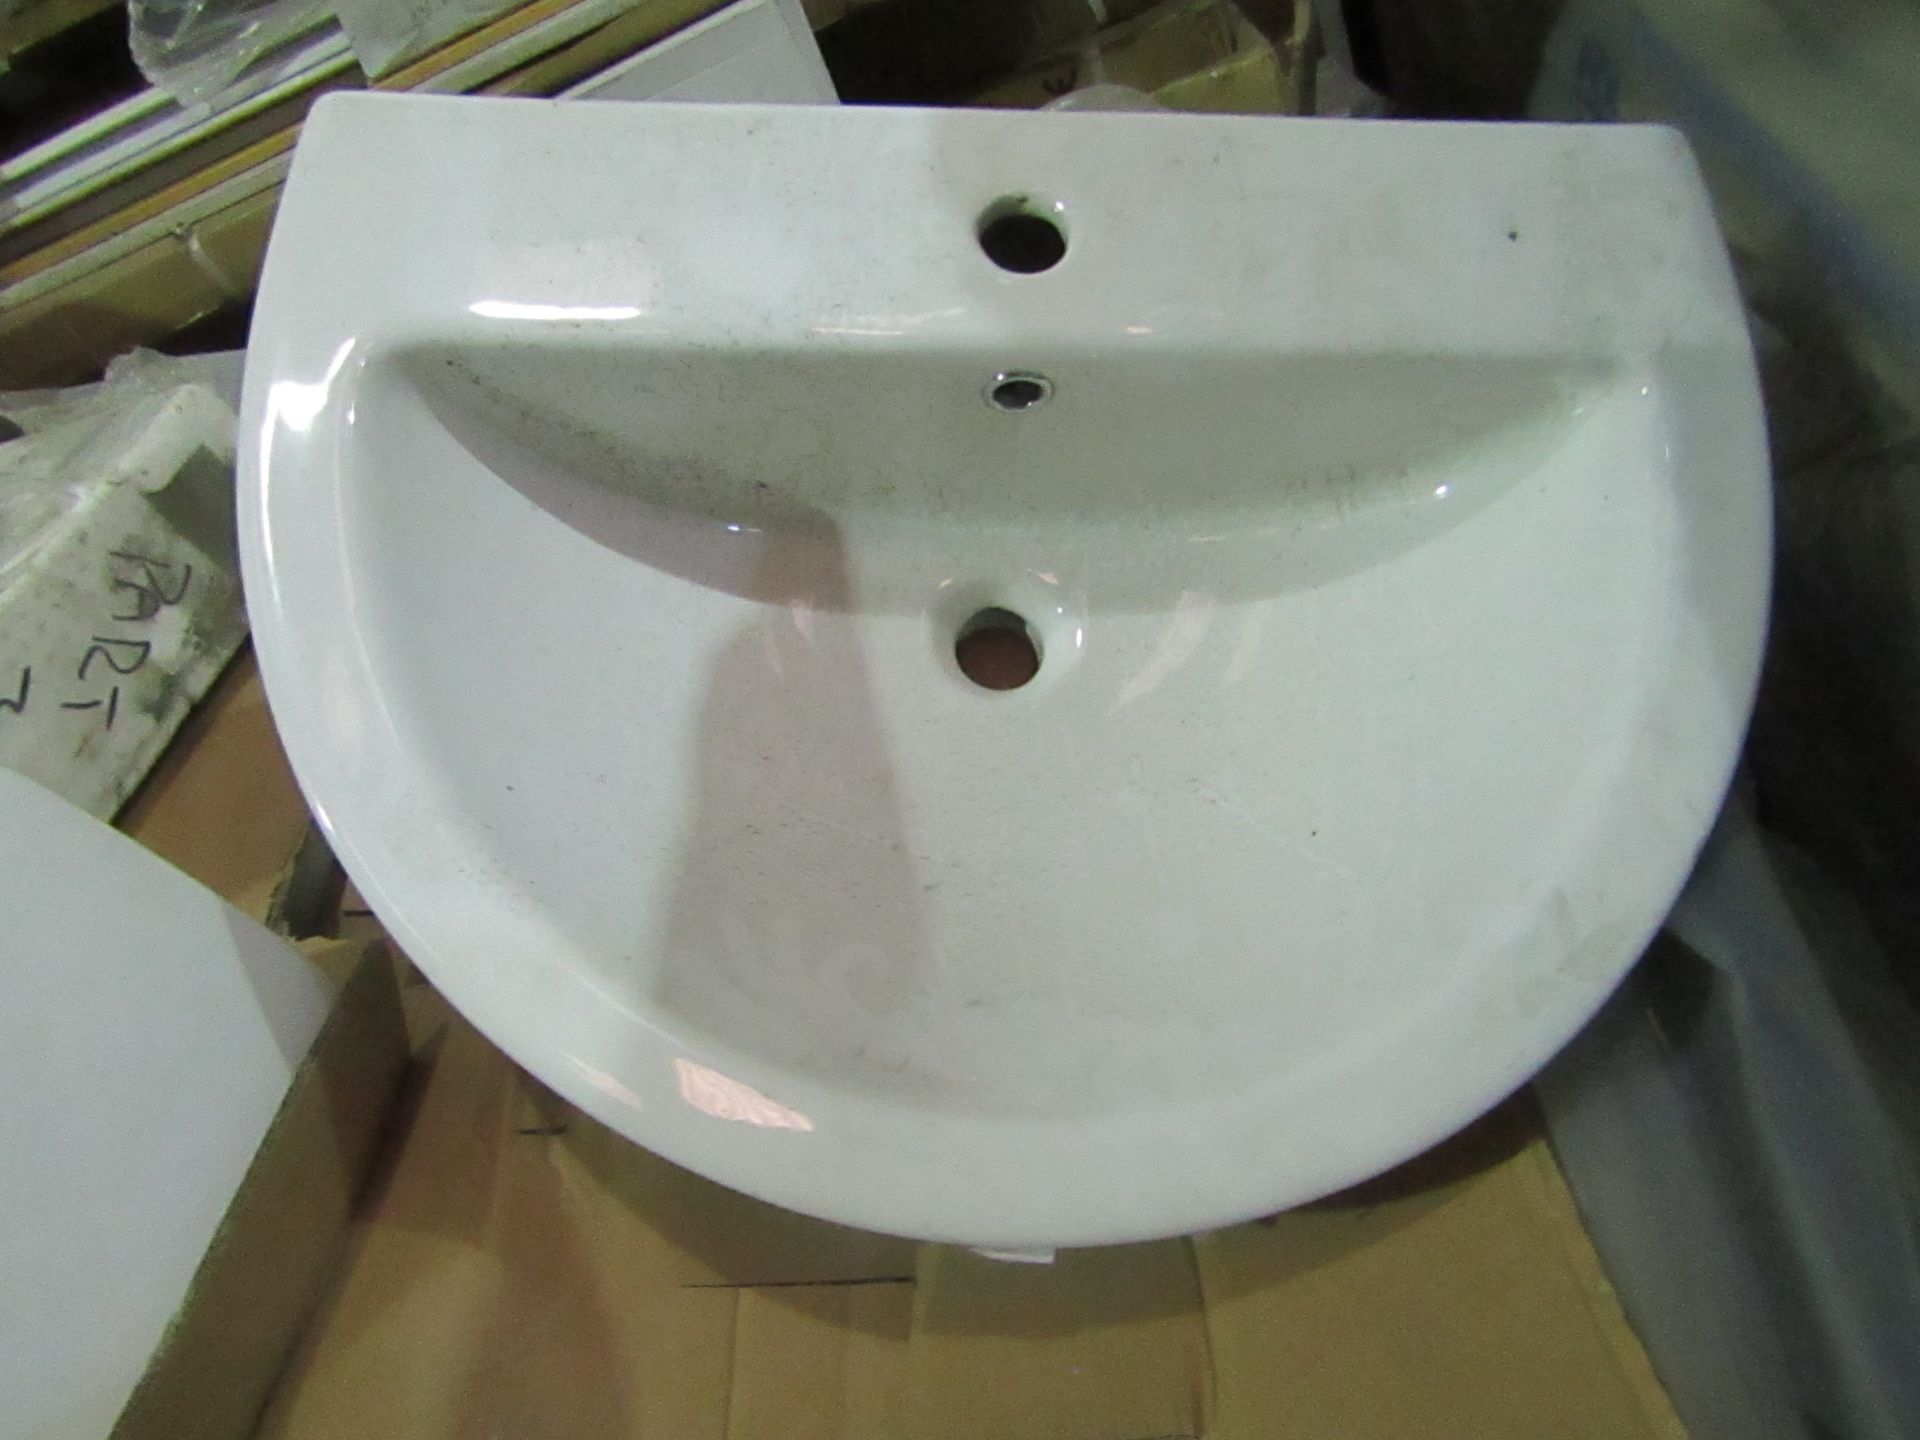 1x Pallet Containing Approx 30x Roca Debba 600x480mm 1TH basins - All New.